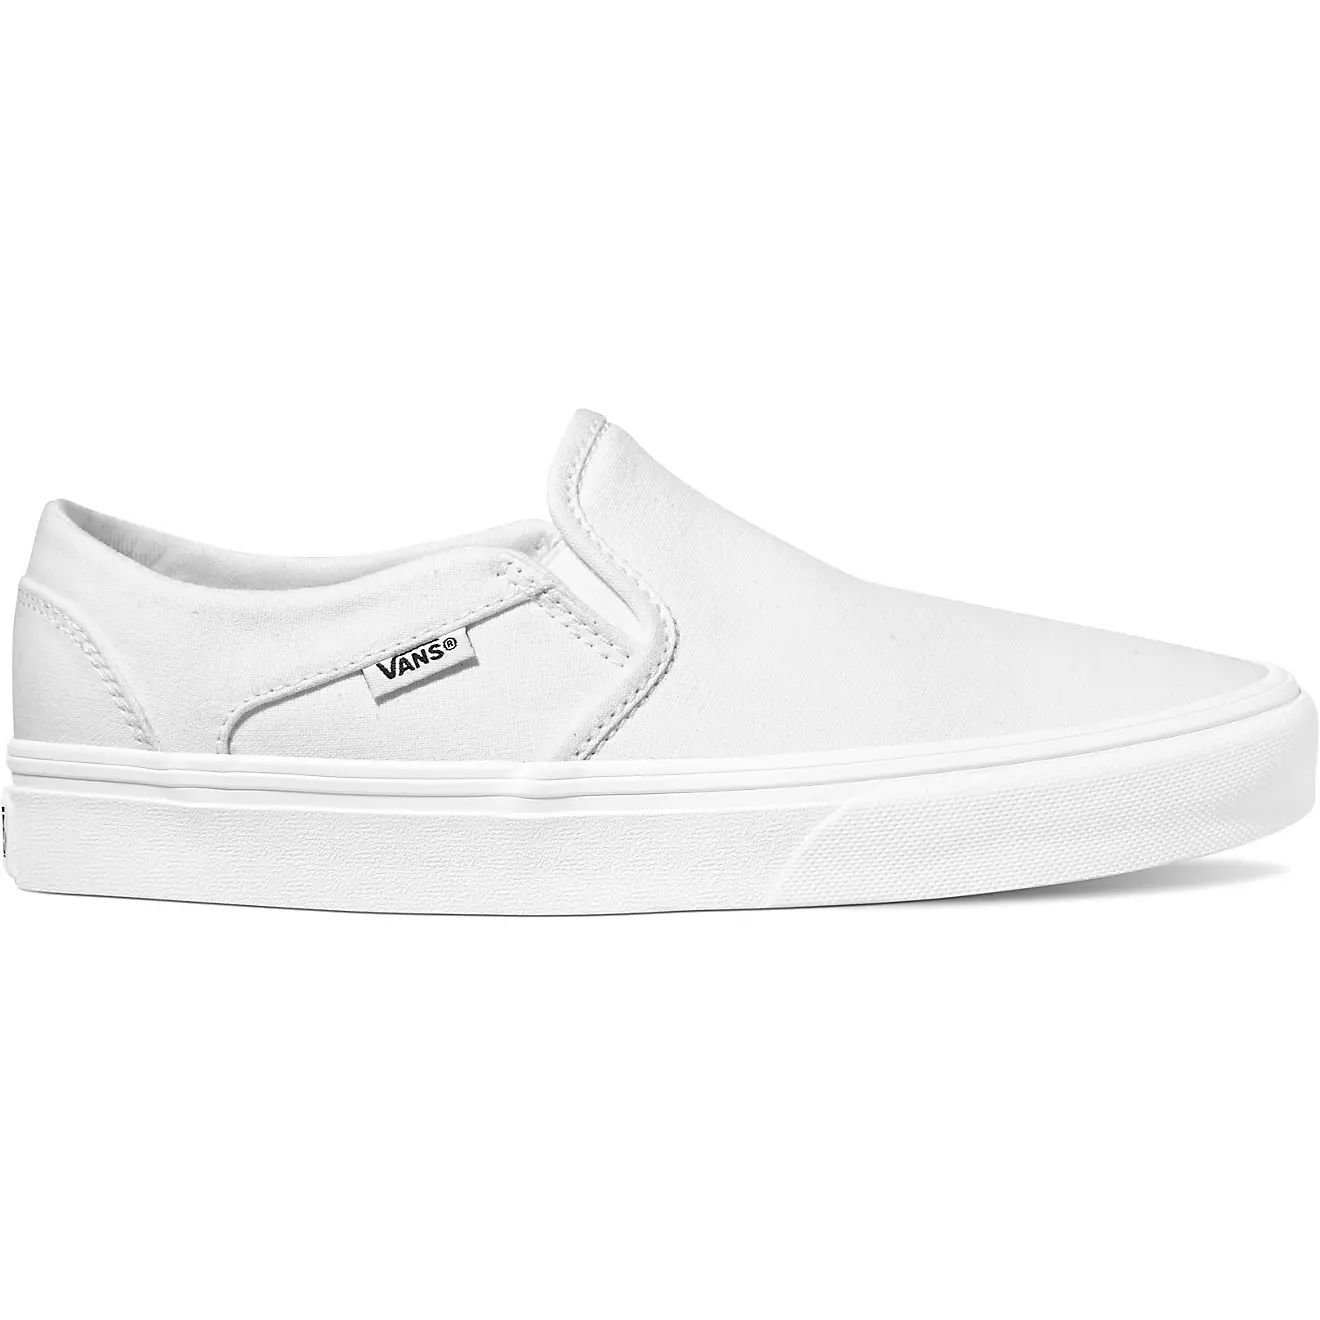 Vans Women's Asher Slip-on Shoes | Academy | Academy Sports + Outdoors